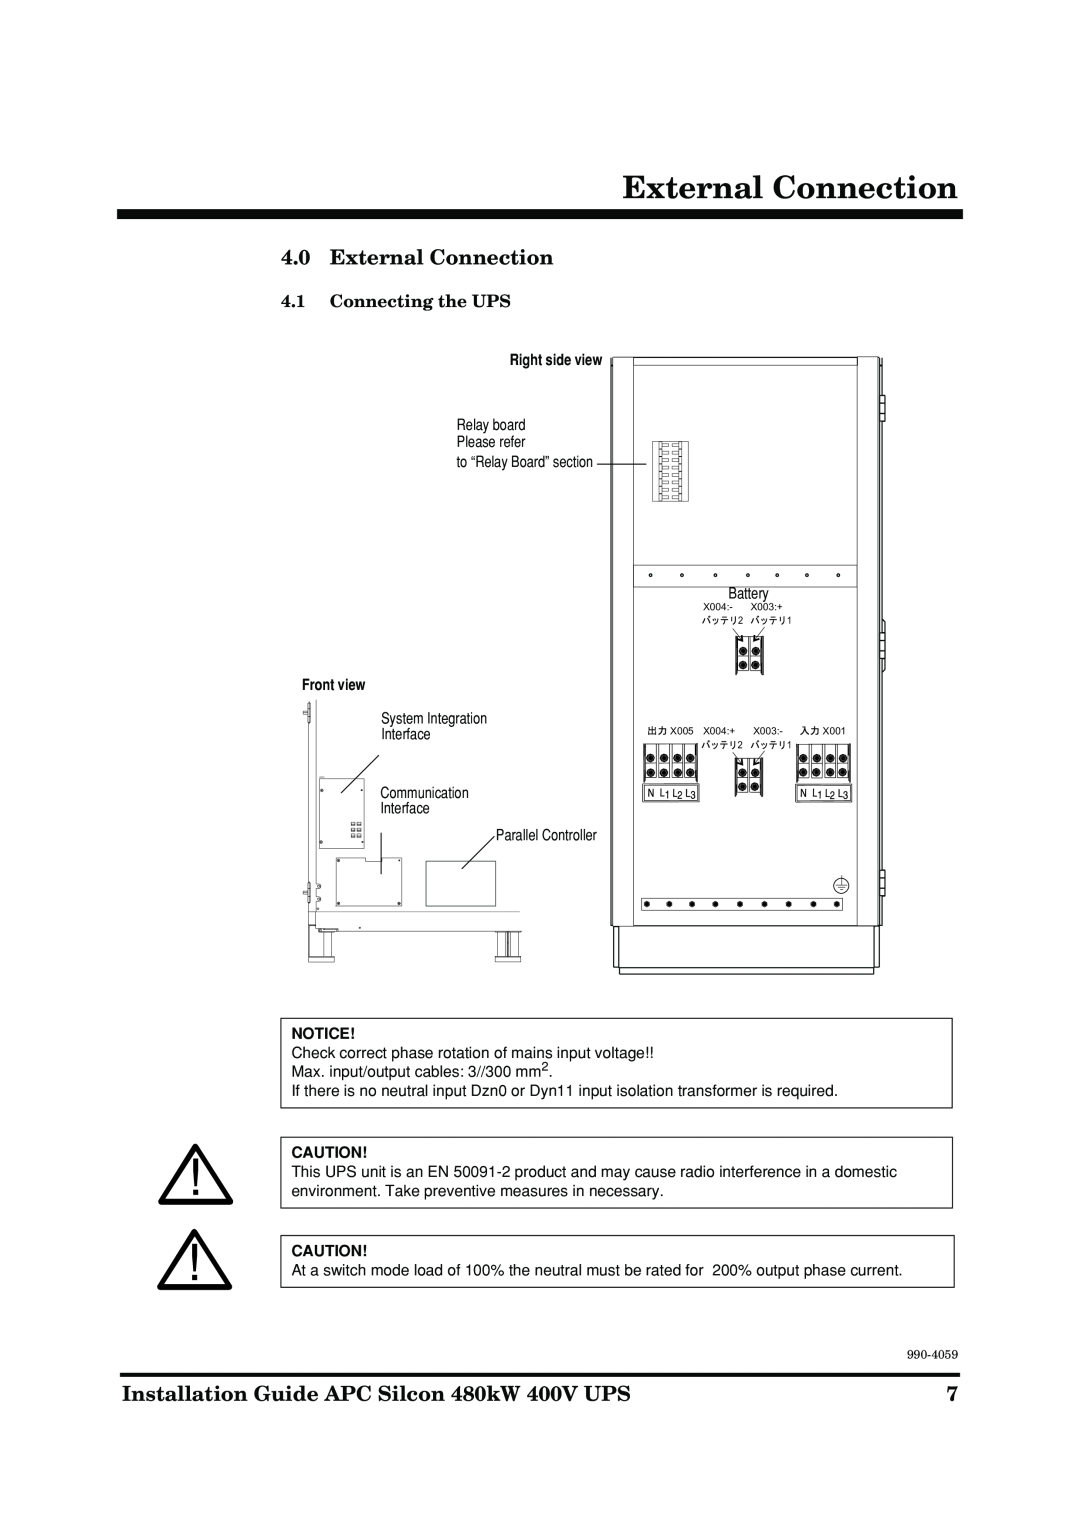 American Power Conversion manual External Connection, Connecting the UPS, Installation Guide APC Silcon 480kW 400V UPS 